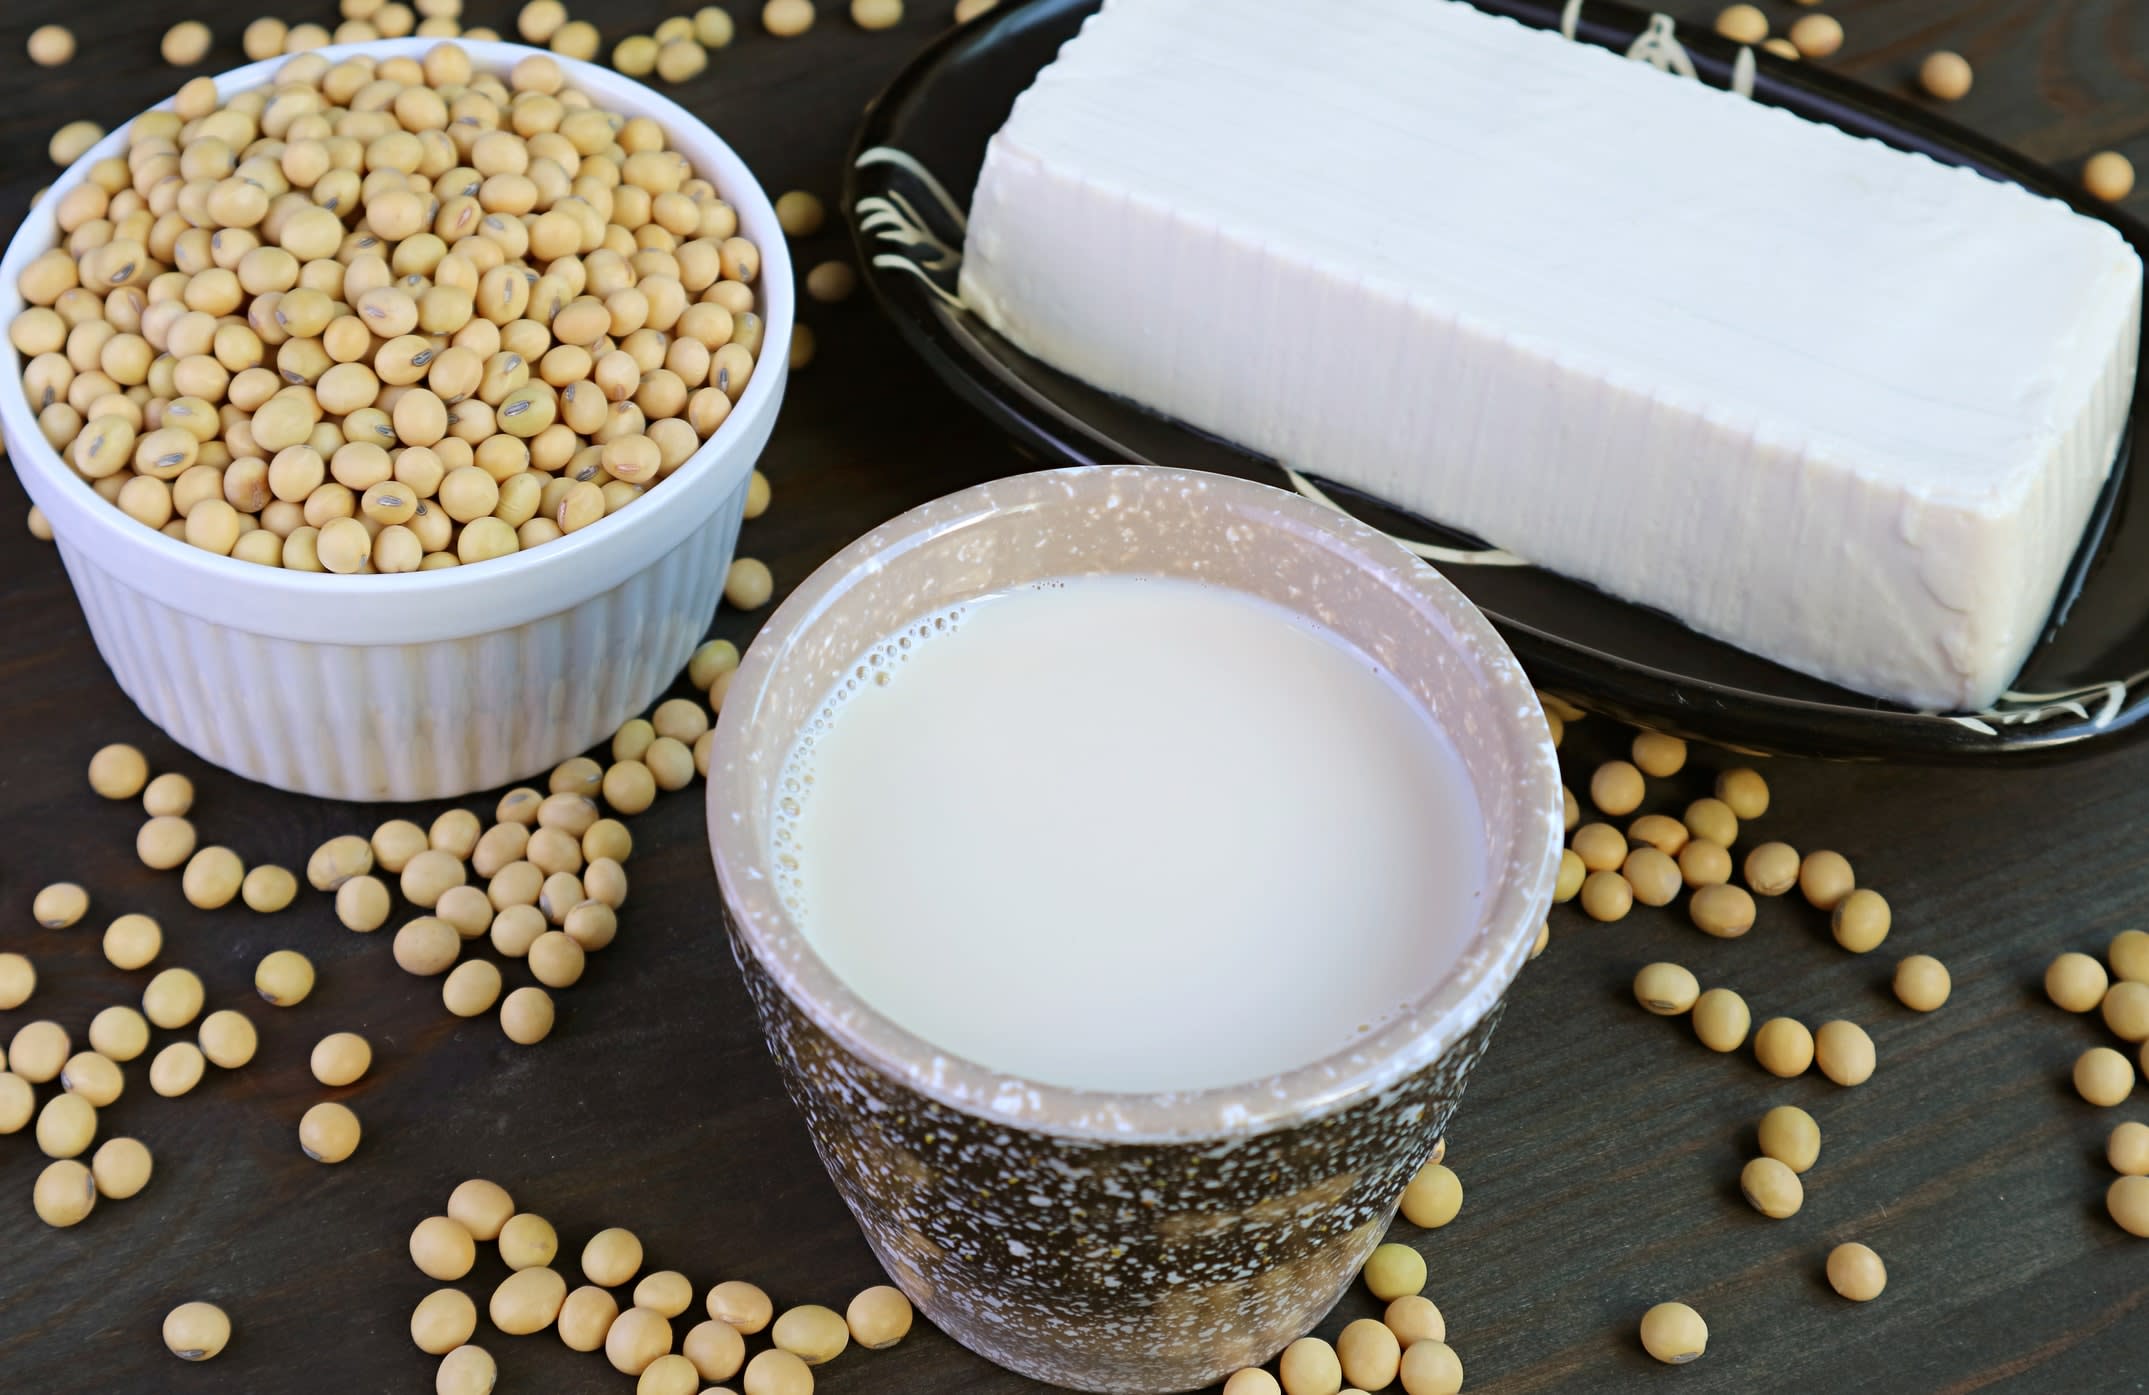 Cup of soy milk, soft tofu and dried soybeans in a container, with soybeans scattered around